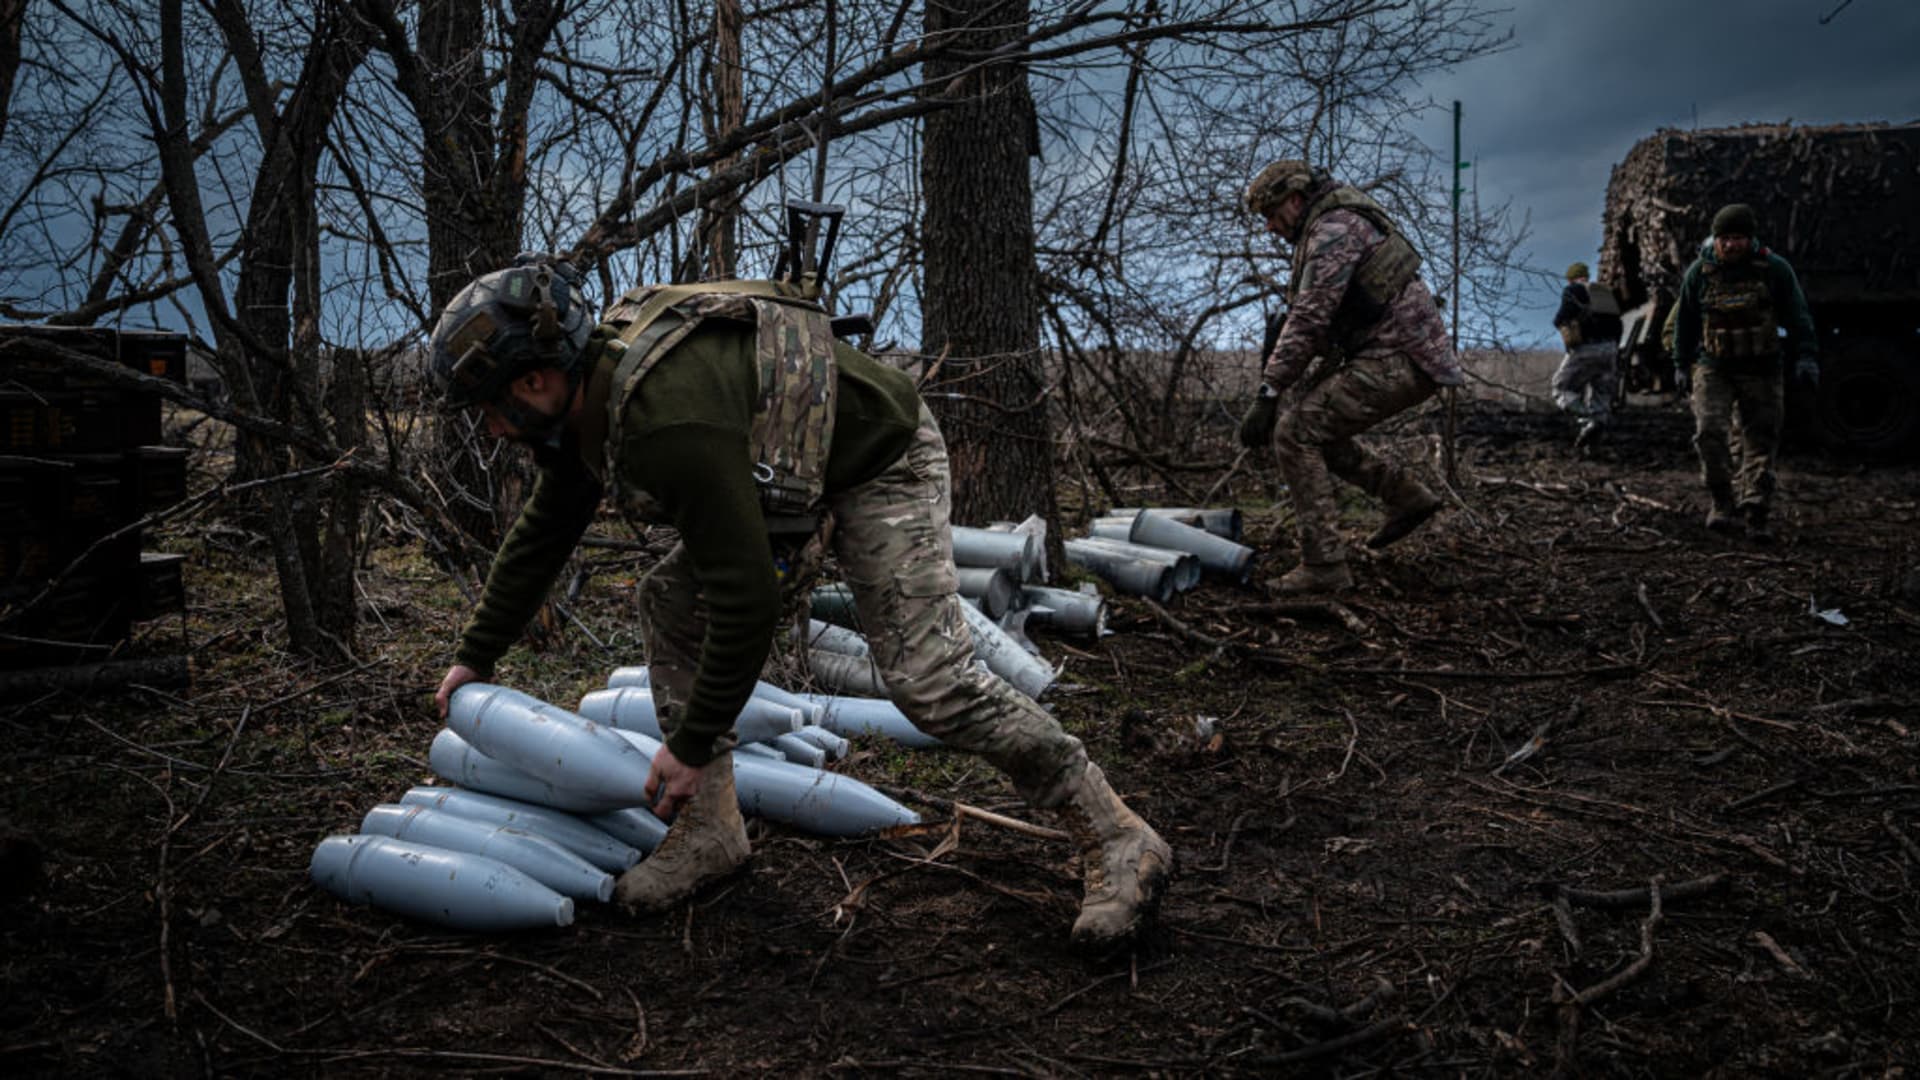 Ukrainian servicemen from the 10th Brigade unload heavy artillery ammunition at a position along the frontline outside of Soledar, Ukraine on March 11, 2023.